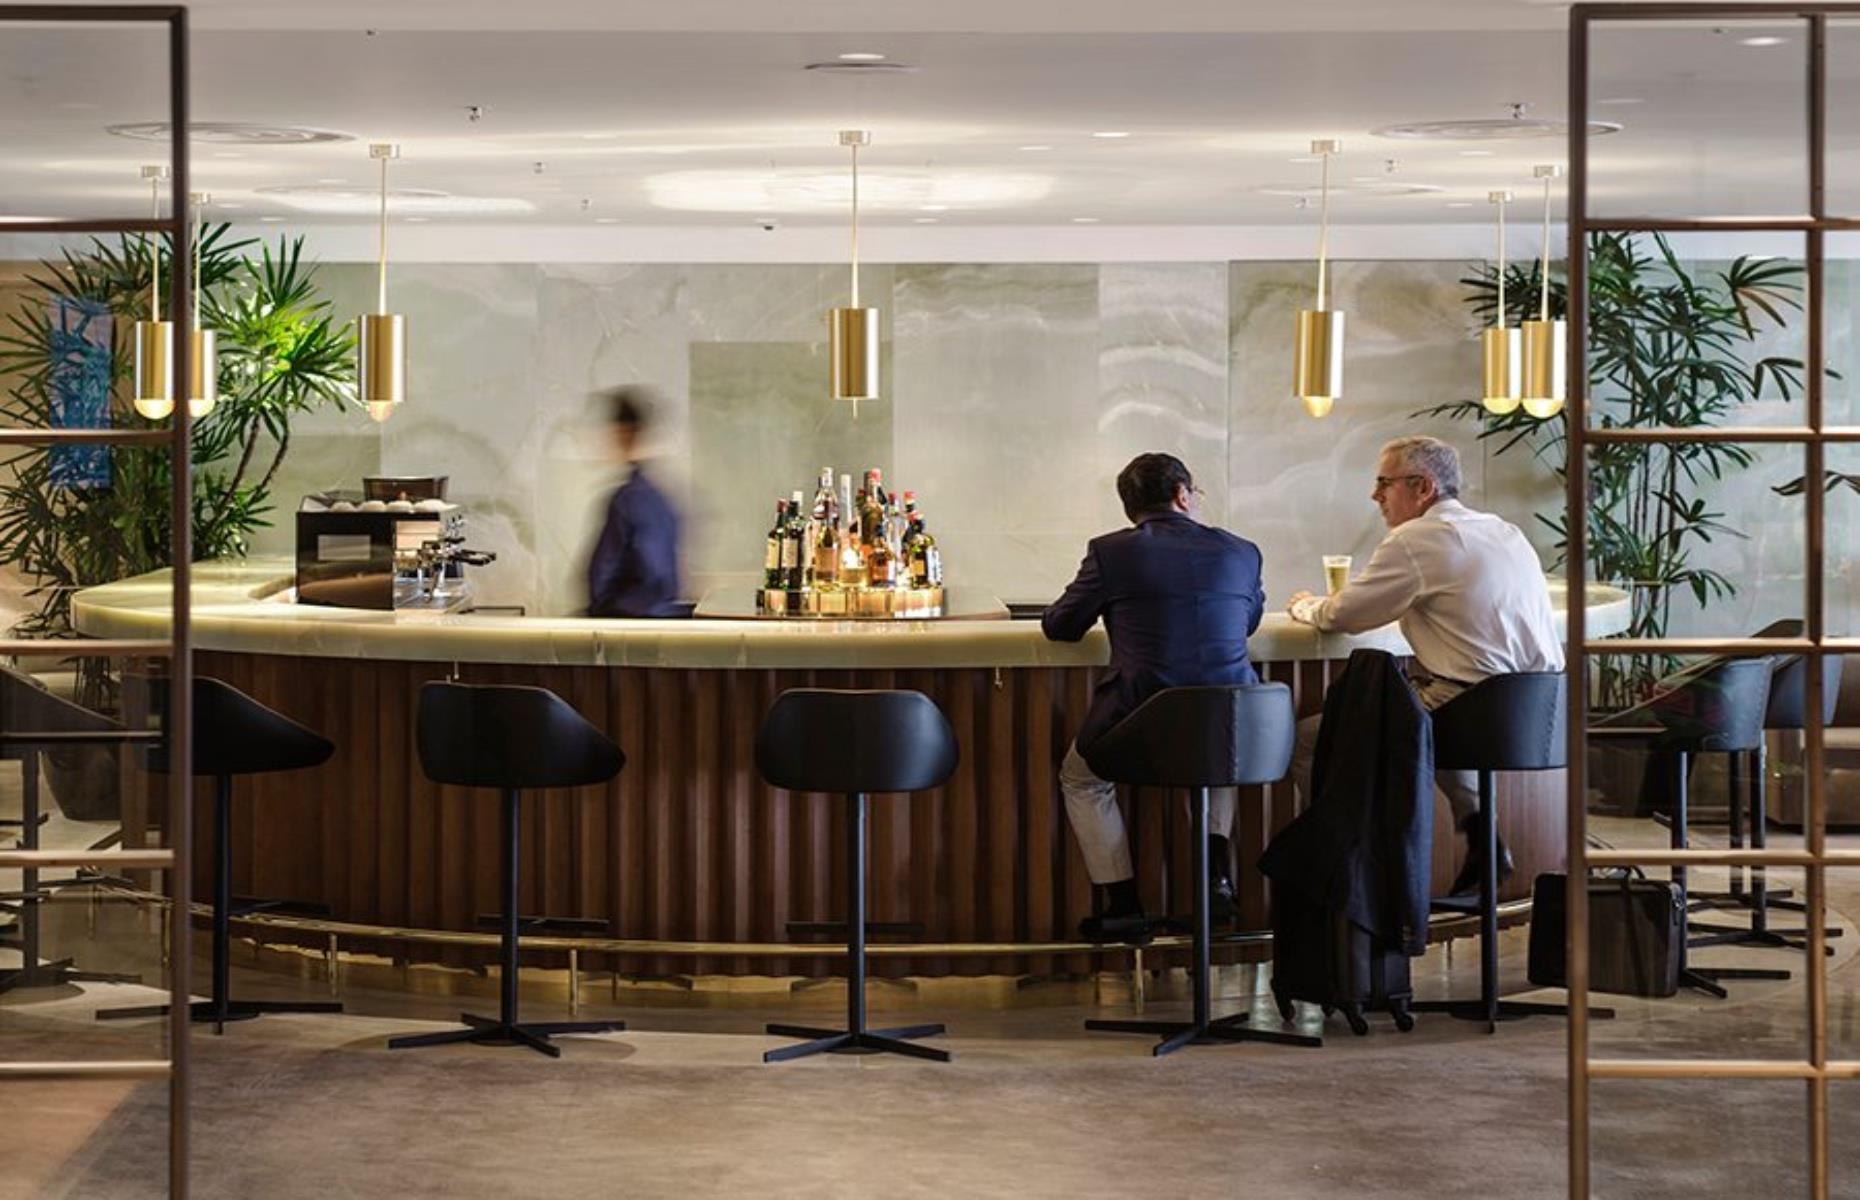 Cathay Pacific is a five-star airline and its First Class lounge – The Pier at Hong Kong International – really reflects that. Not only is there a la carte dining and a help-yourself pantry for snacking, there's an elegant bar with green onyx walls and walnut wood panels.